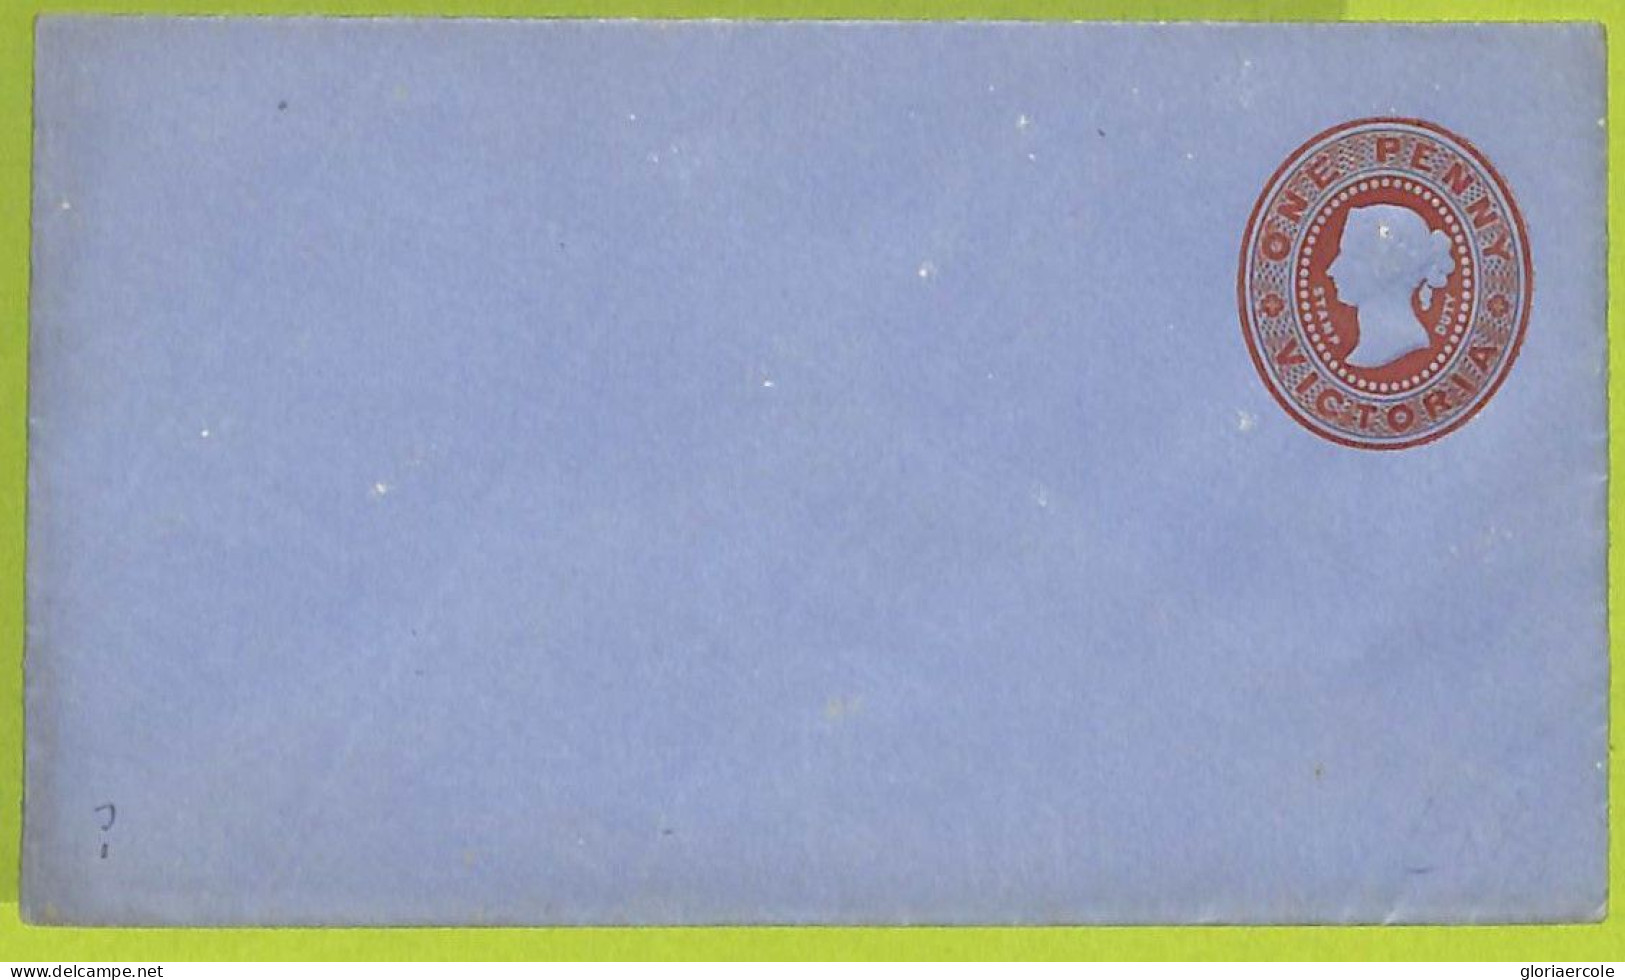 40206 - VICTORIA - Postal History - STATIONERY COVER Printed To Order BLUE LAID PAPER 1 P - 136*78 - Covers & Documents